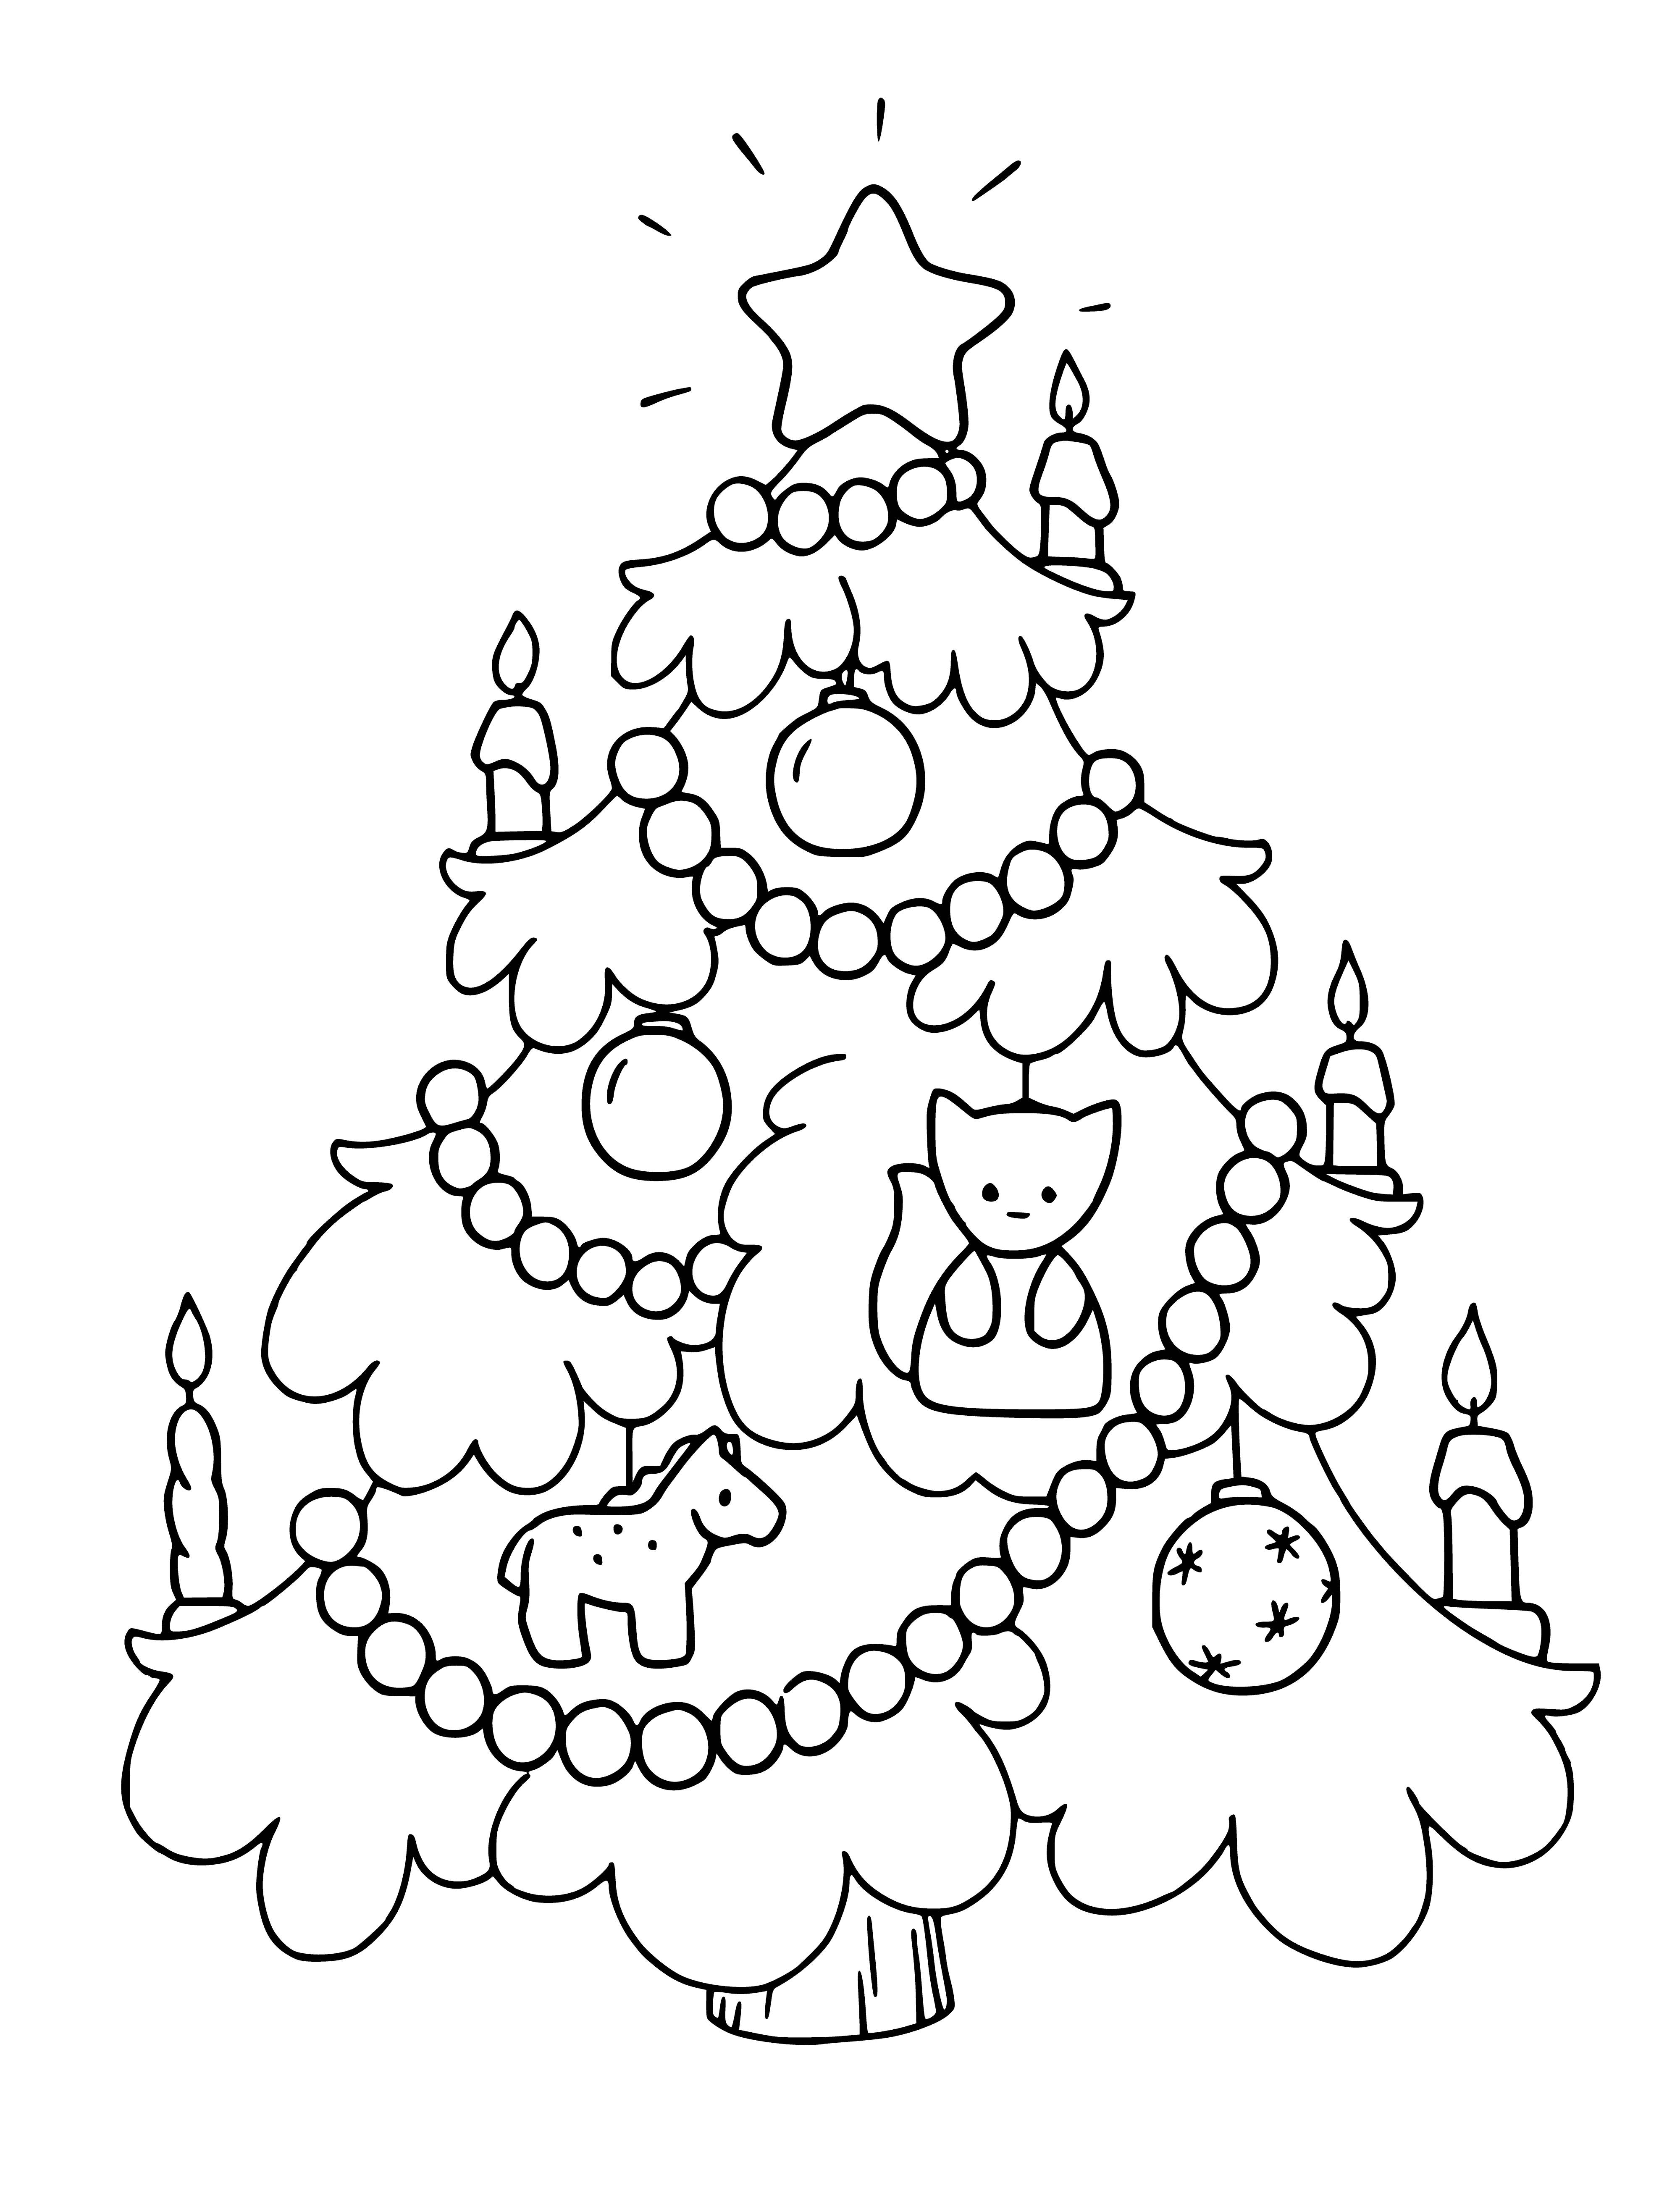 coloring page: Christmas tree decorated w/ red & gold balls & ribbons, star on top. Presents on ground, wrapped in red & green paper.